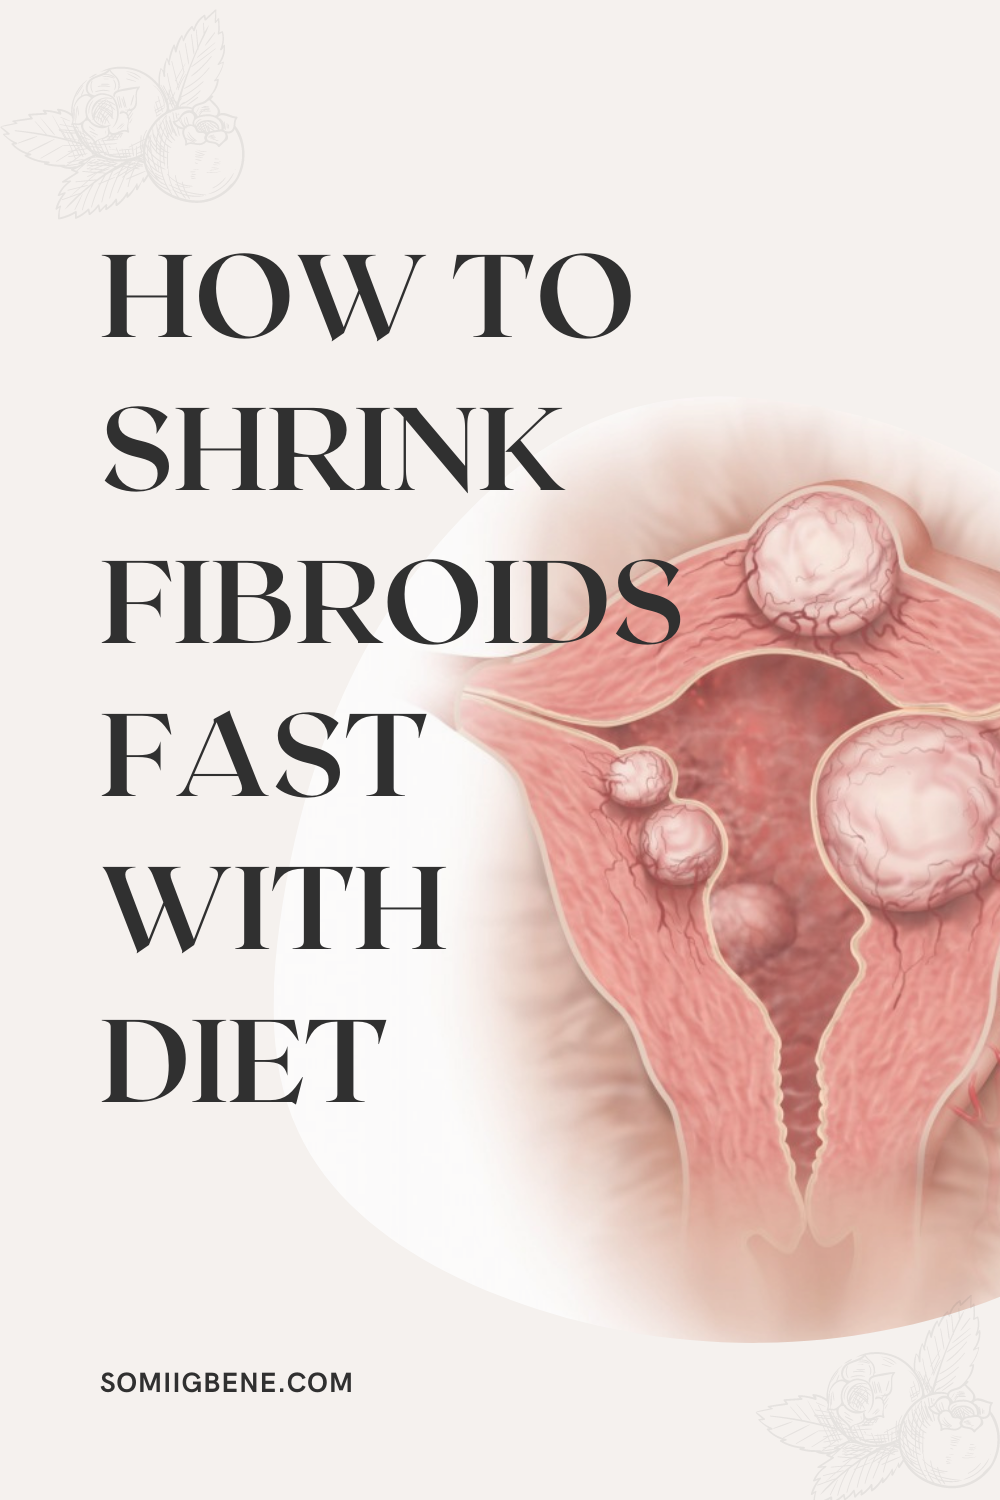 Shrink fibroids fast with diet